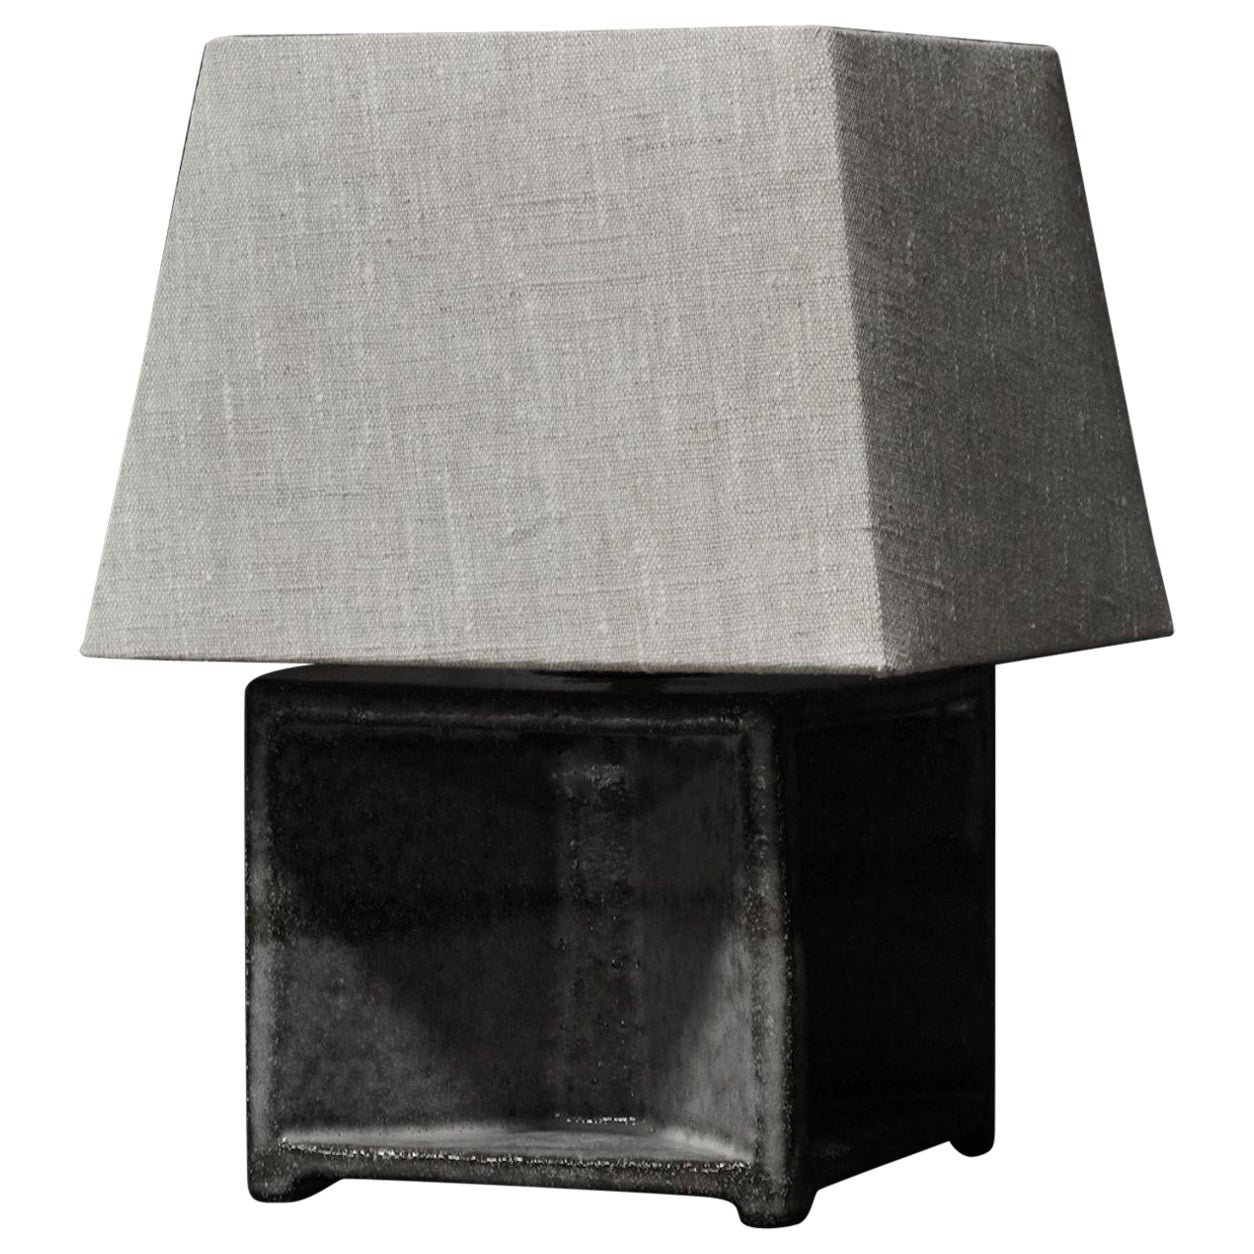 Small Square Ceramic Table Lamp For Sale